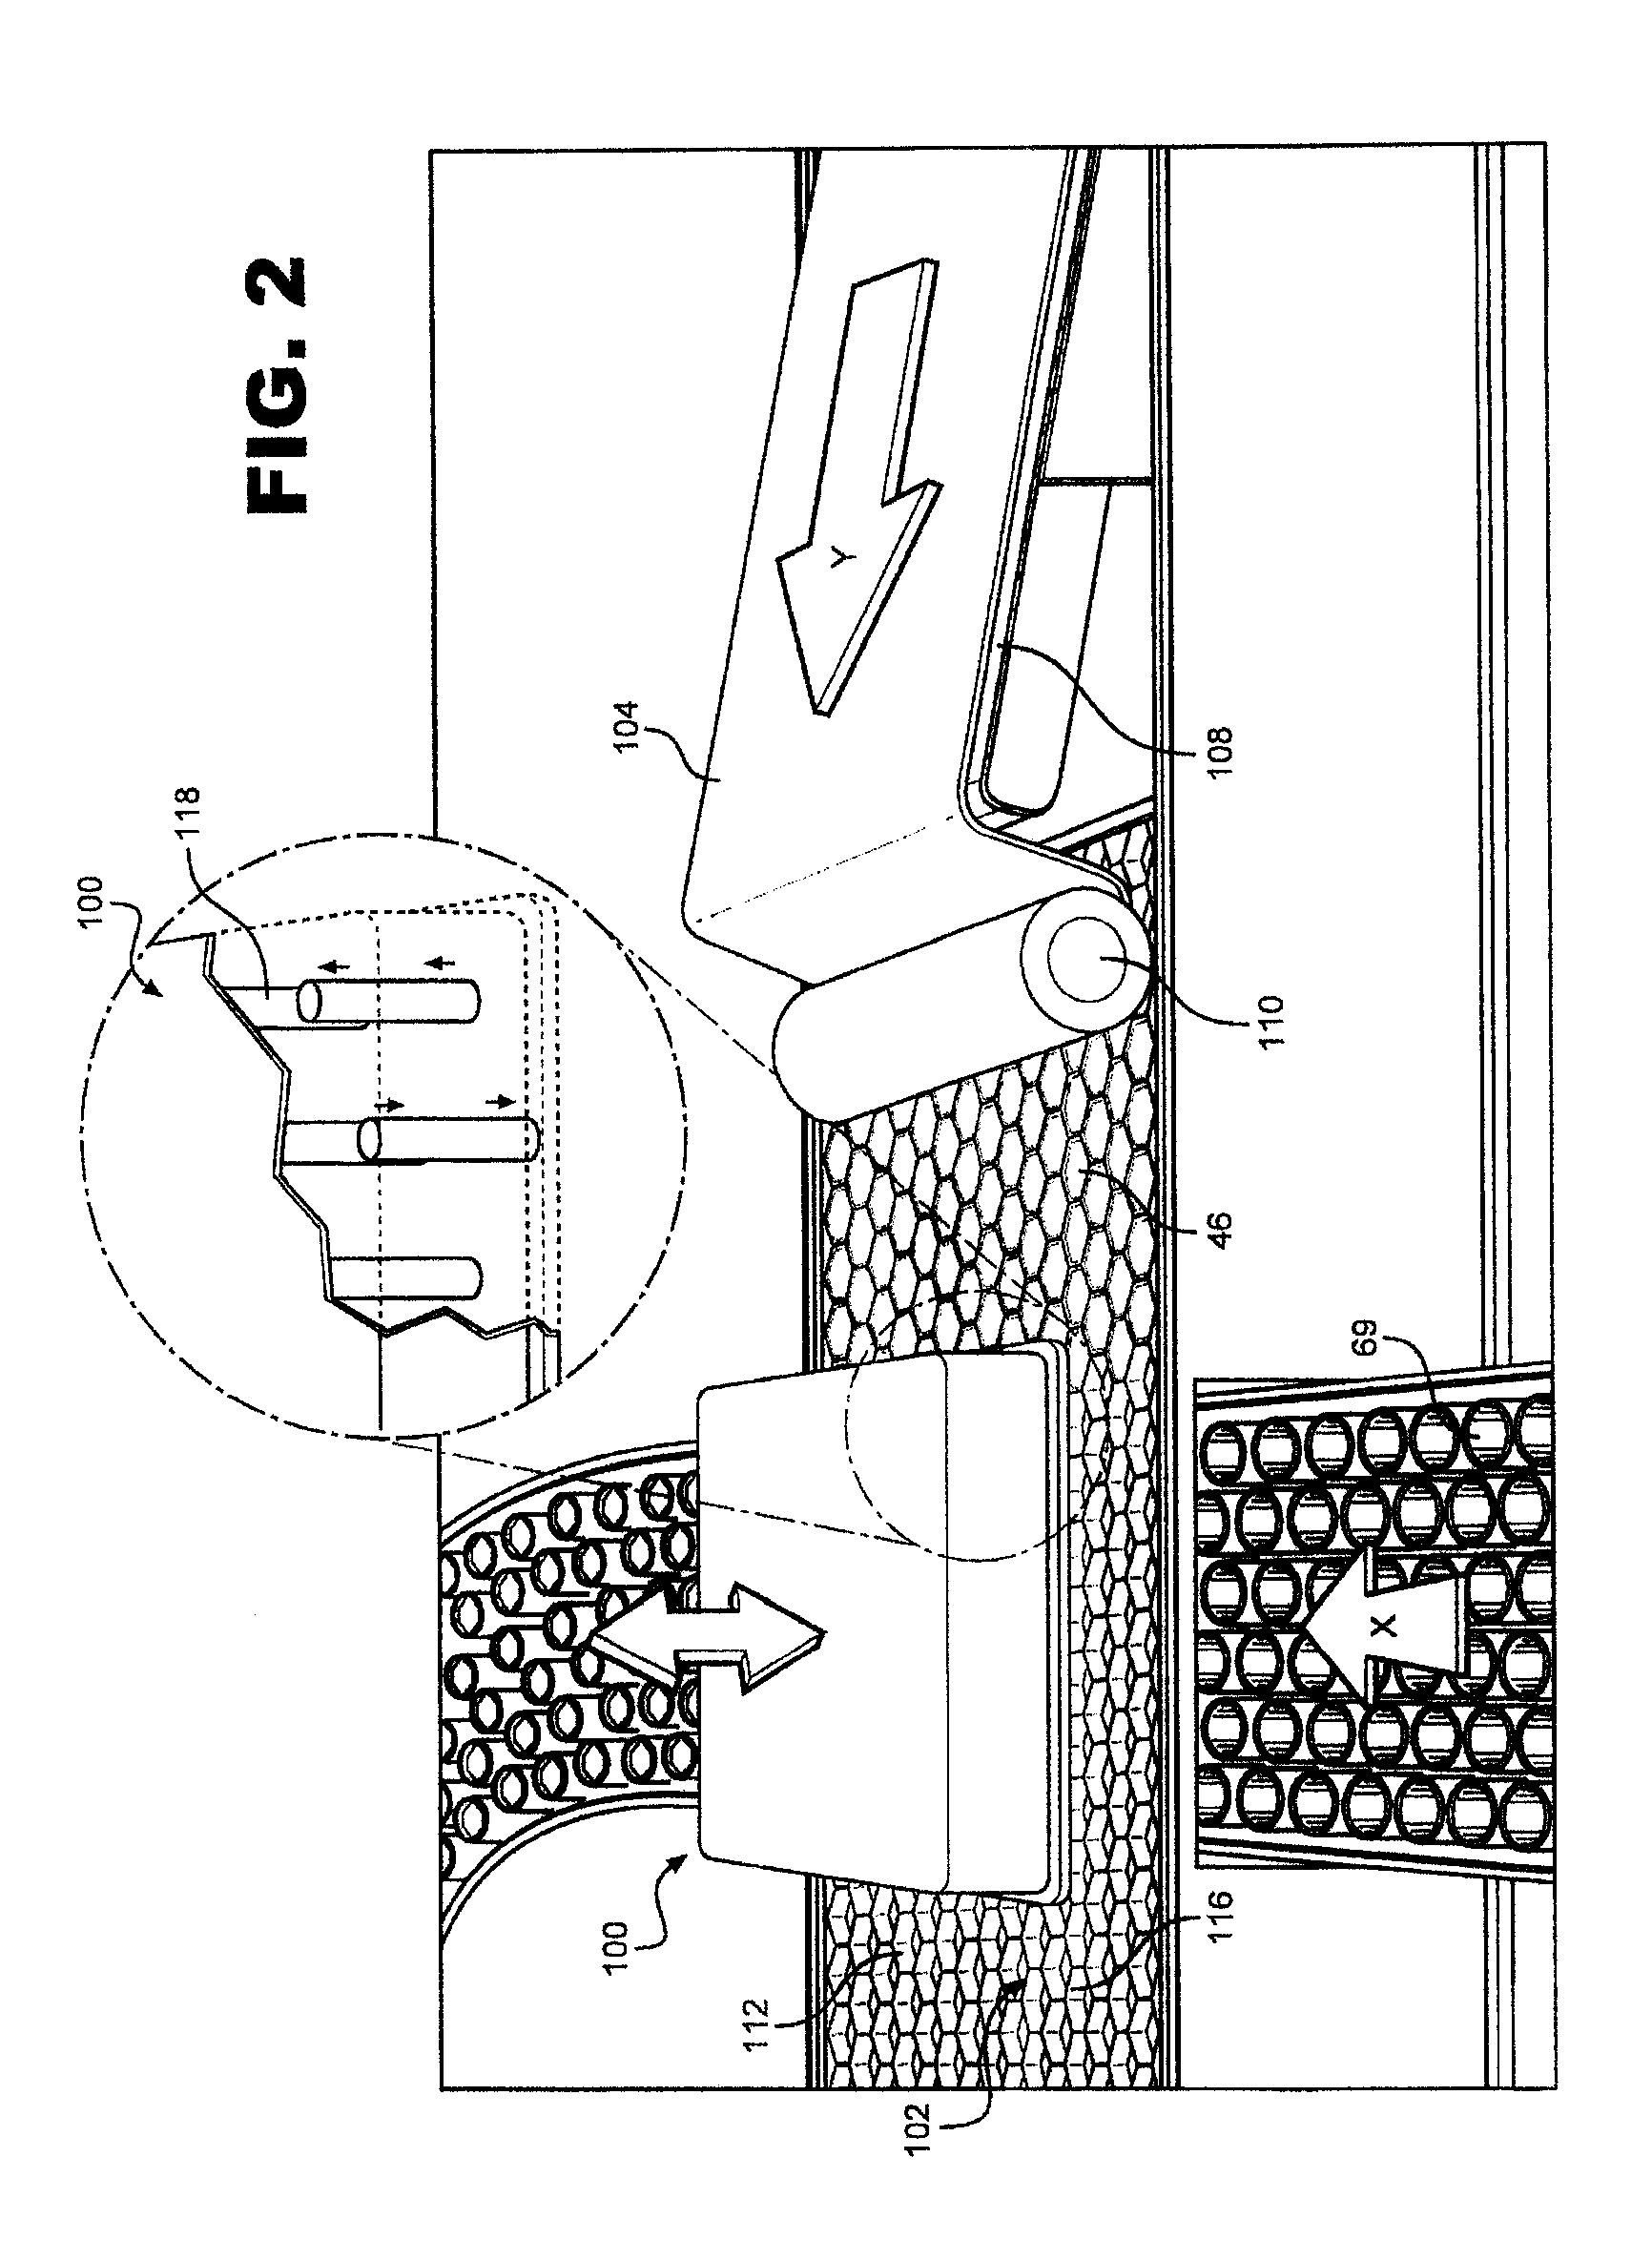 Food packaging with vertical to horizontal transfer loading